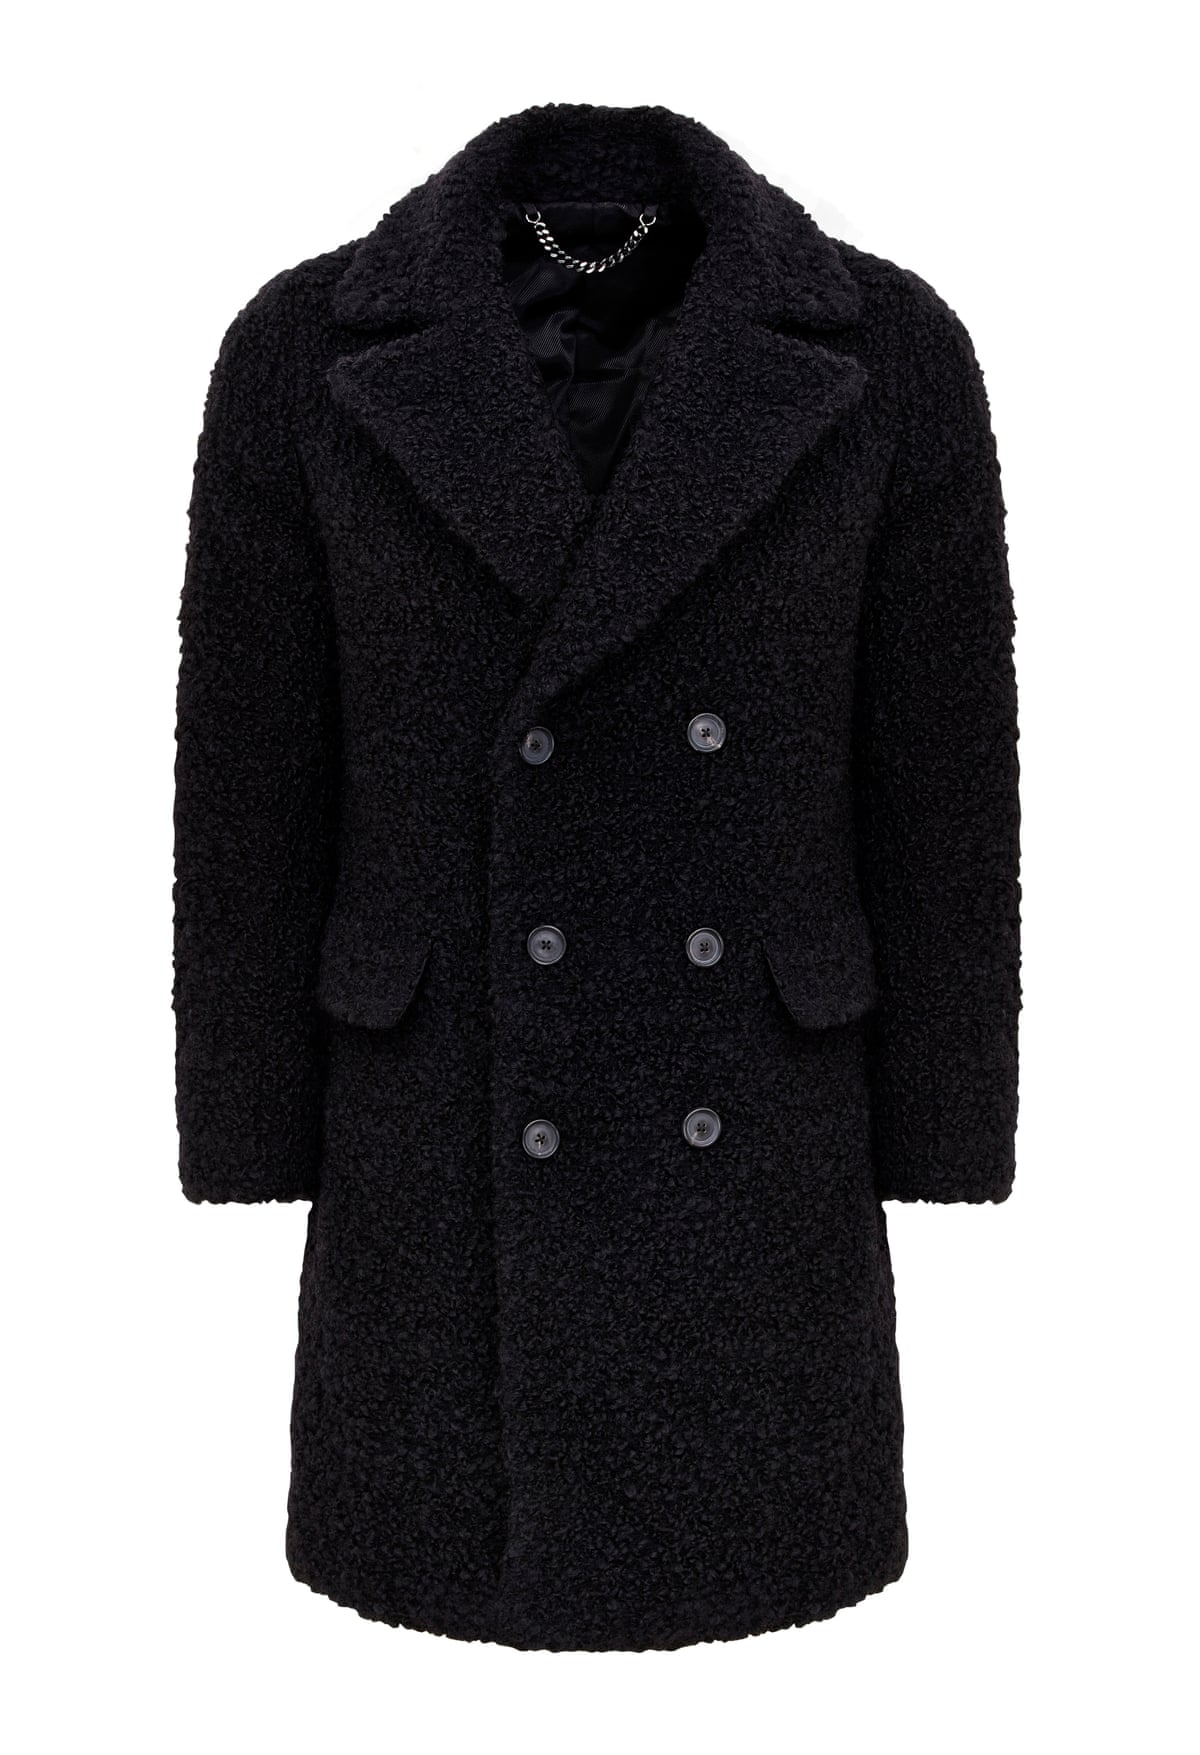 Party on: Christmas 2015 going-out coats for men – in pictures ...